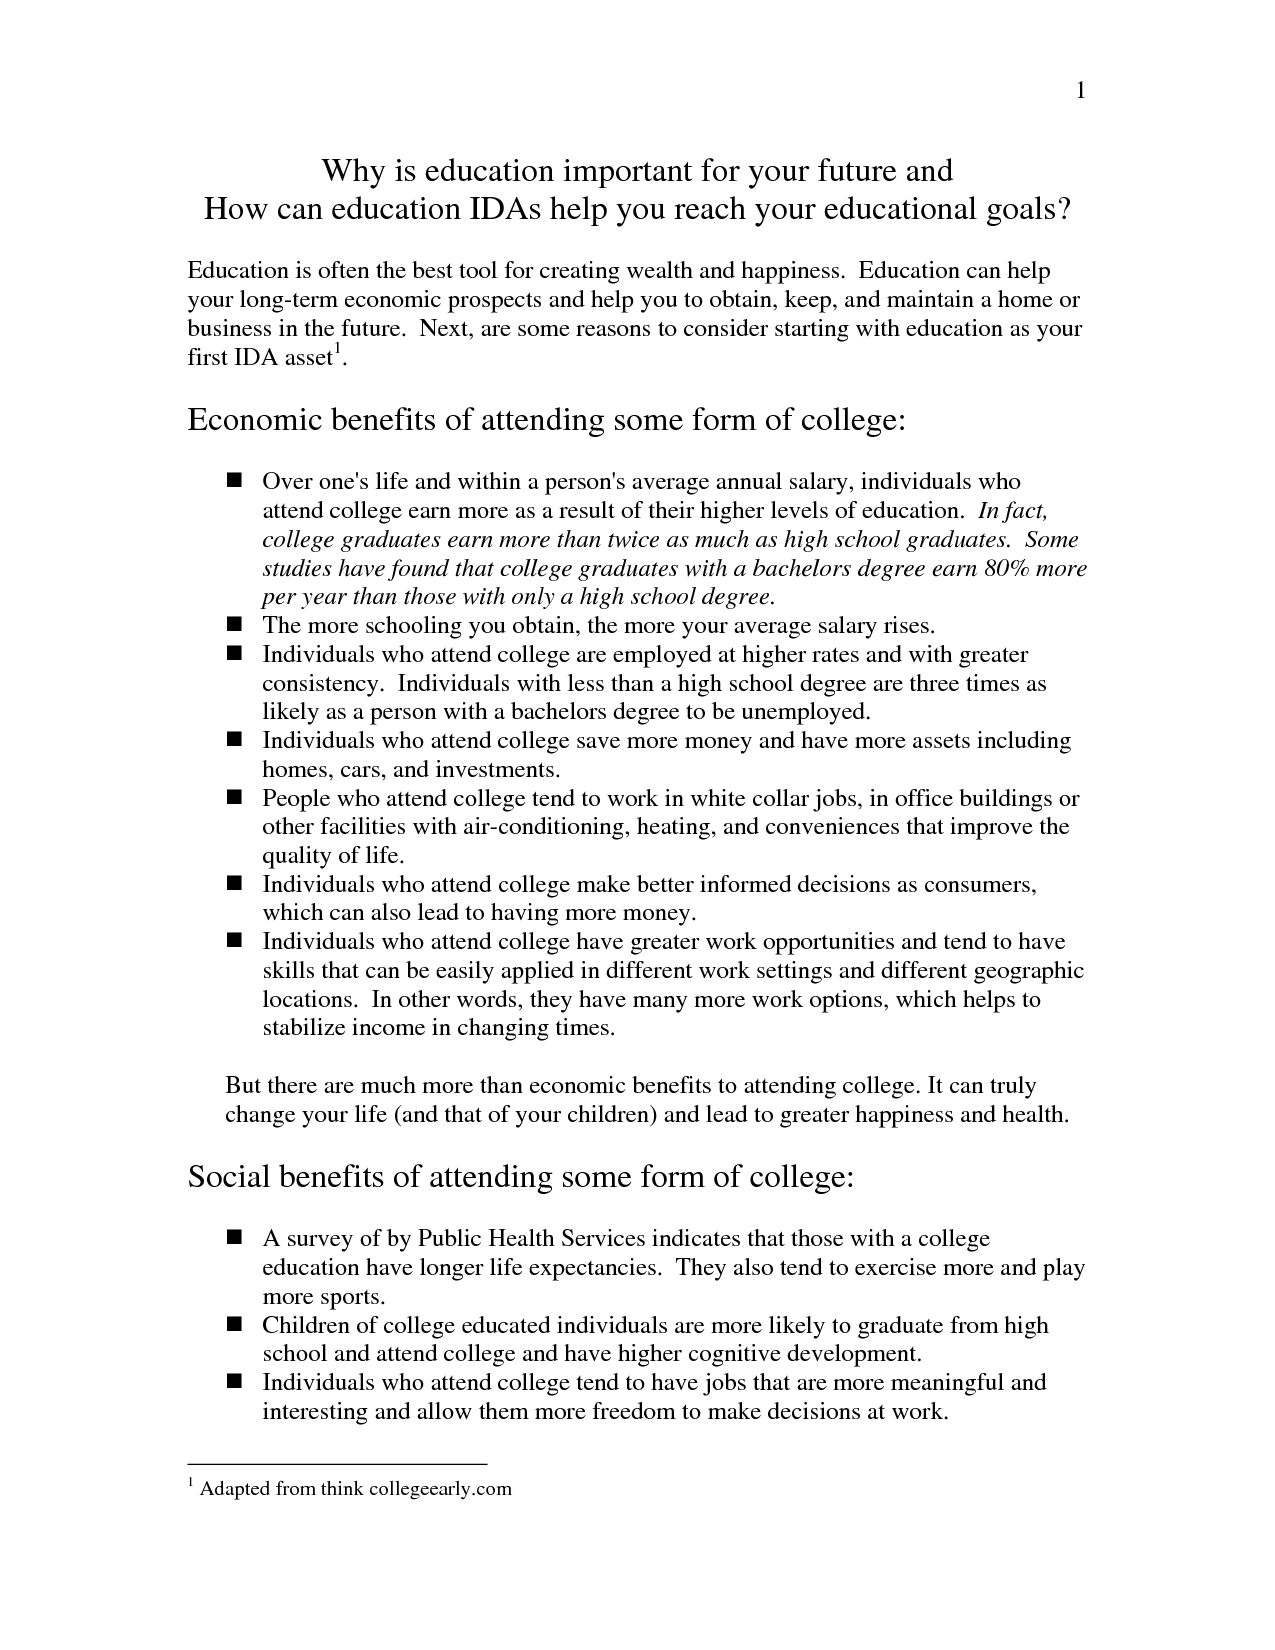 Why A College Education Is Important Essay - Words | Cram